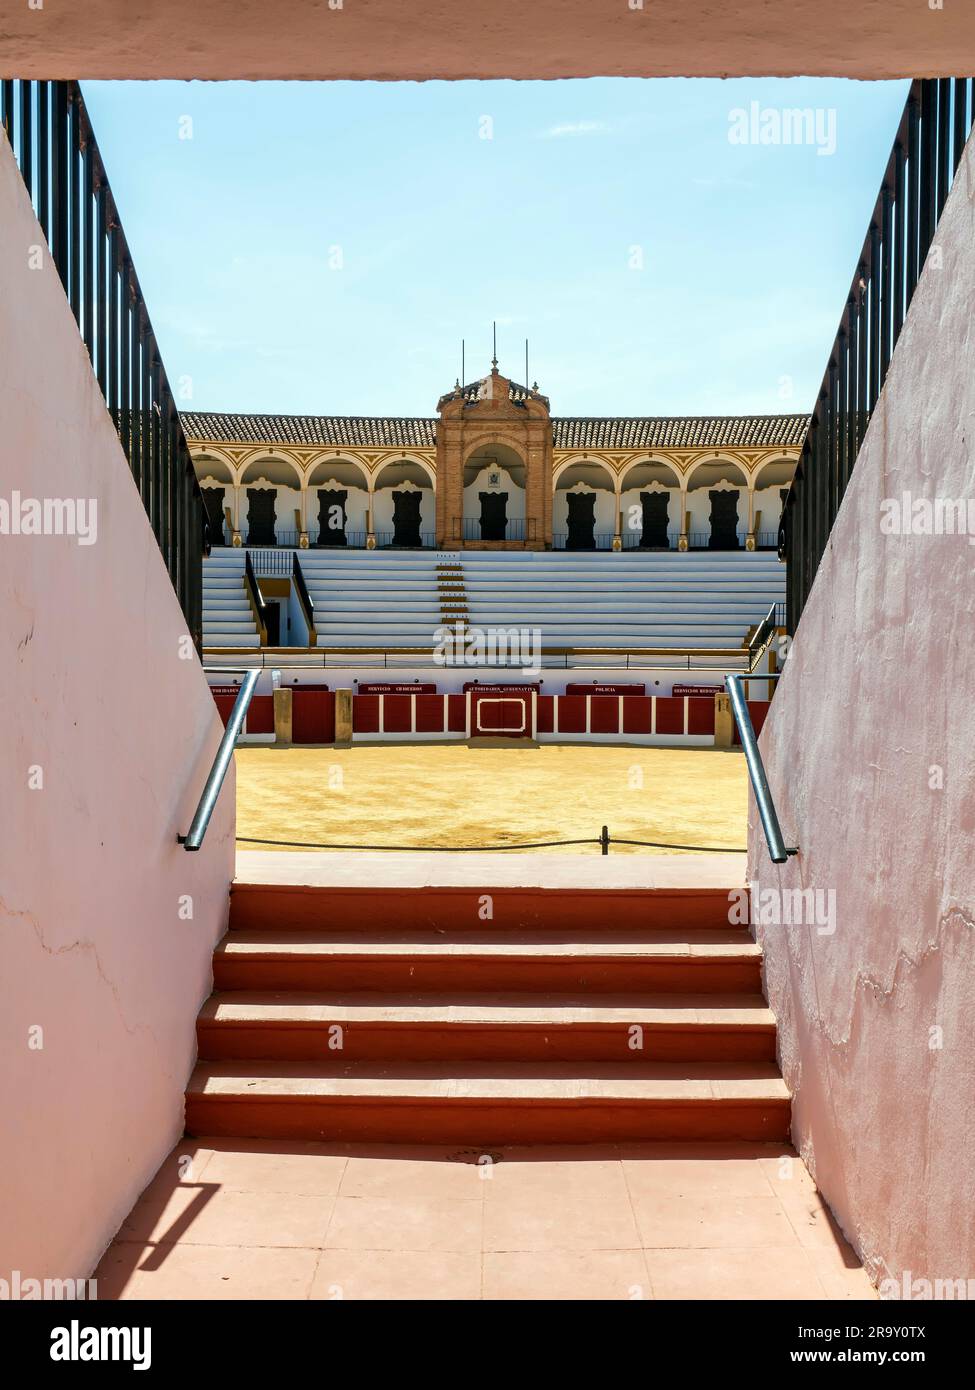 Architecture of the bullring of Antequera, Málaga. Stock Photo